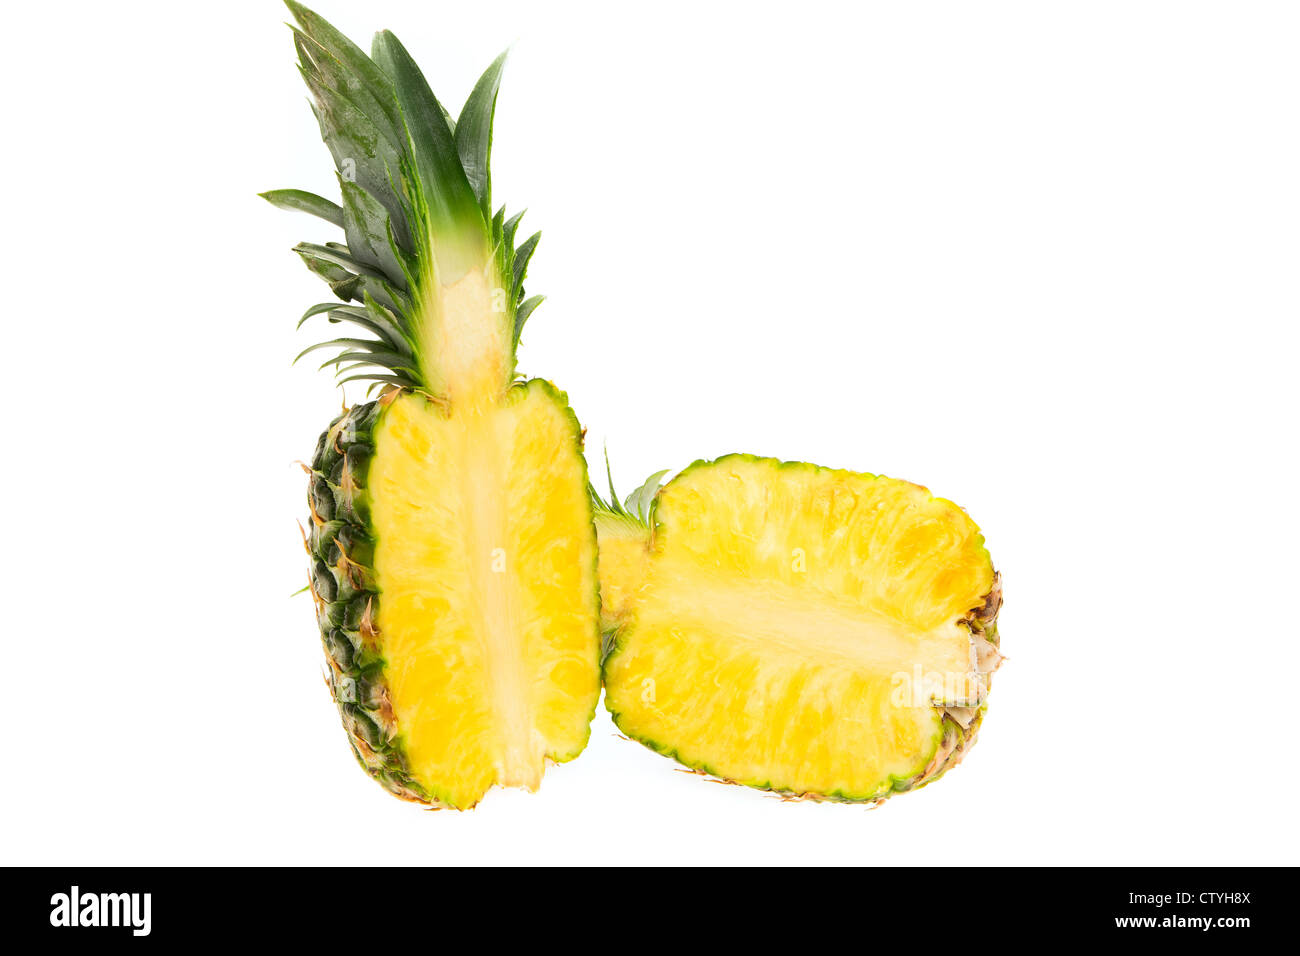 Fresh pineapple cut in half - studio shot with a white background Stock Photo